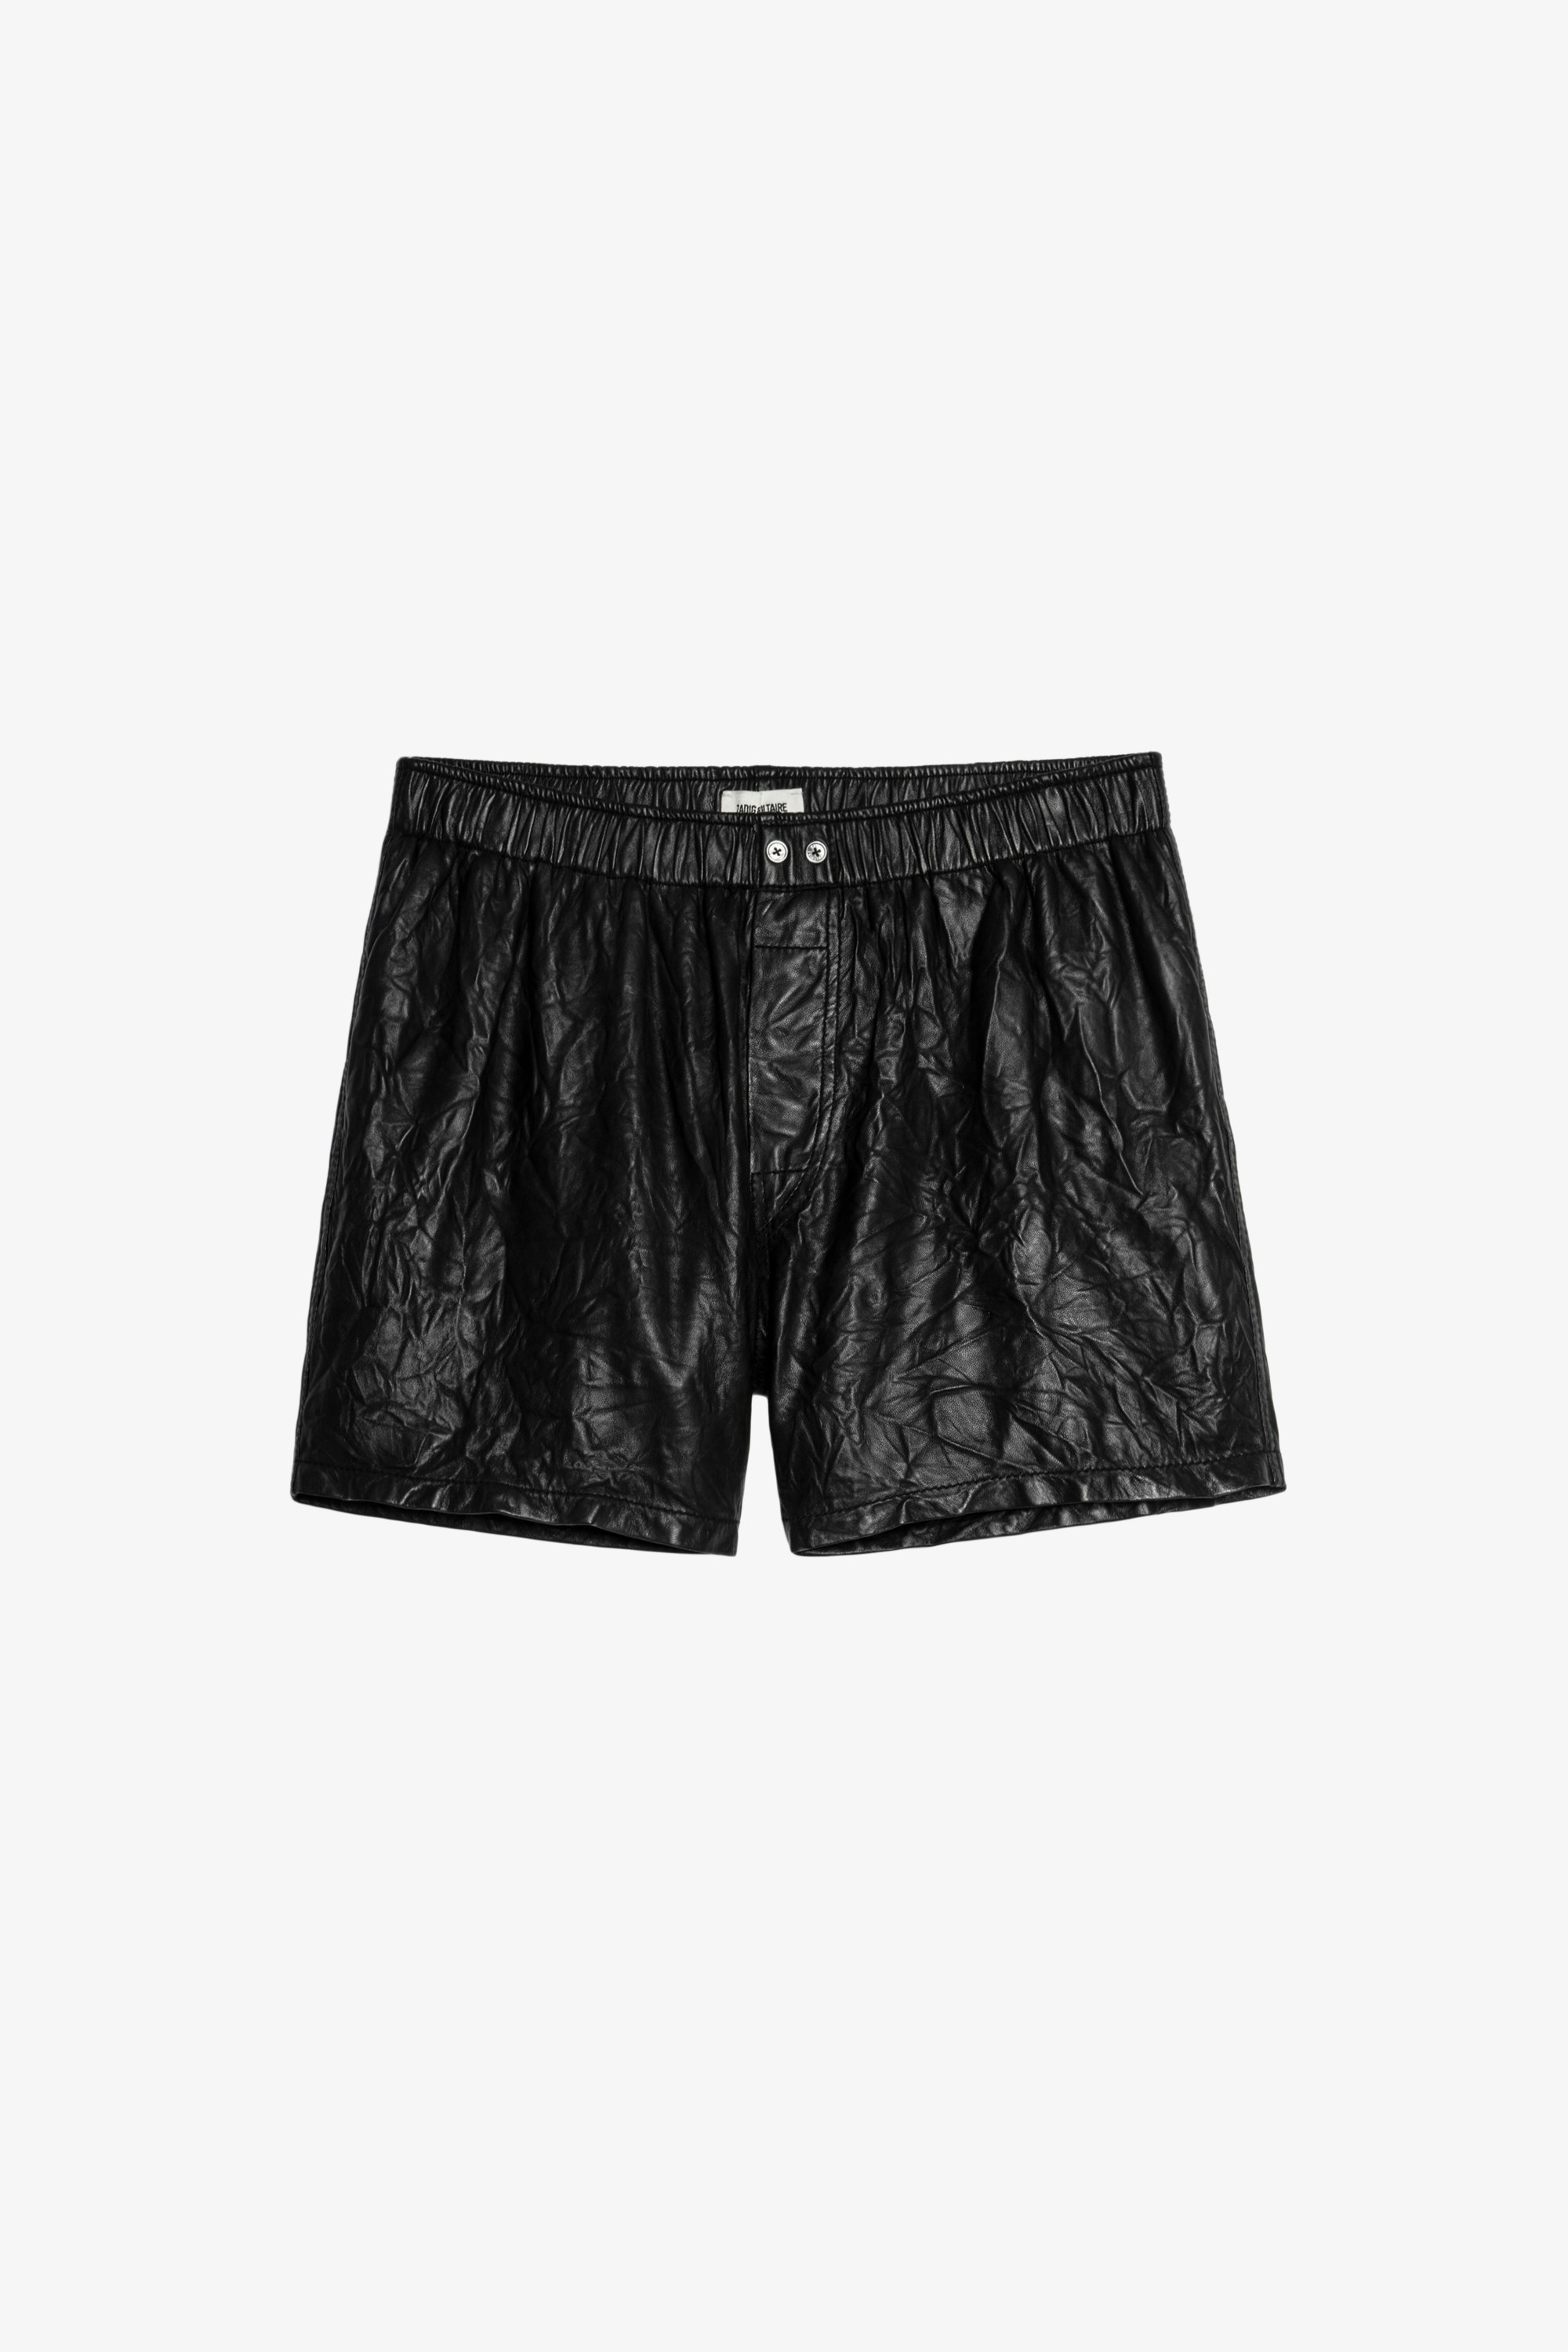 Pax Shorts Crinkled Leather undefined